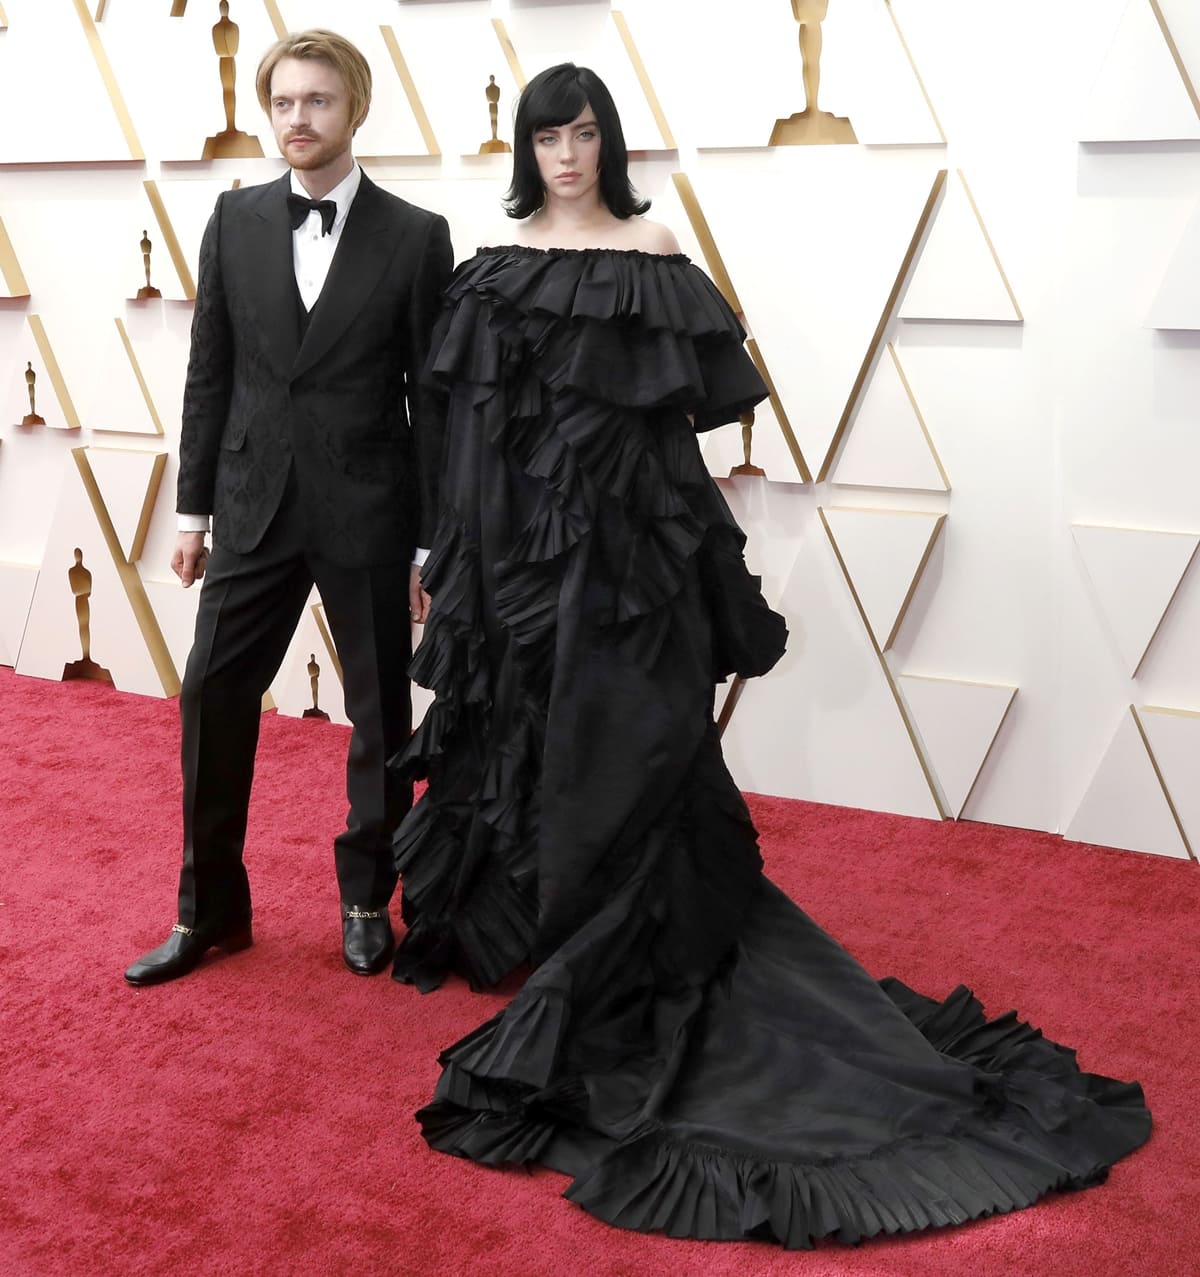 Billie Eilish and her brother Finneas both wore Gucci at the 2022 Academy Awards